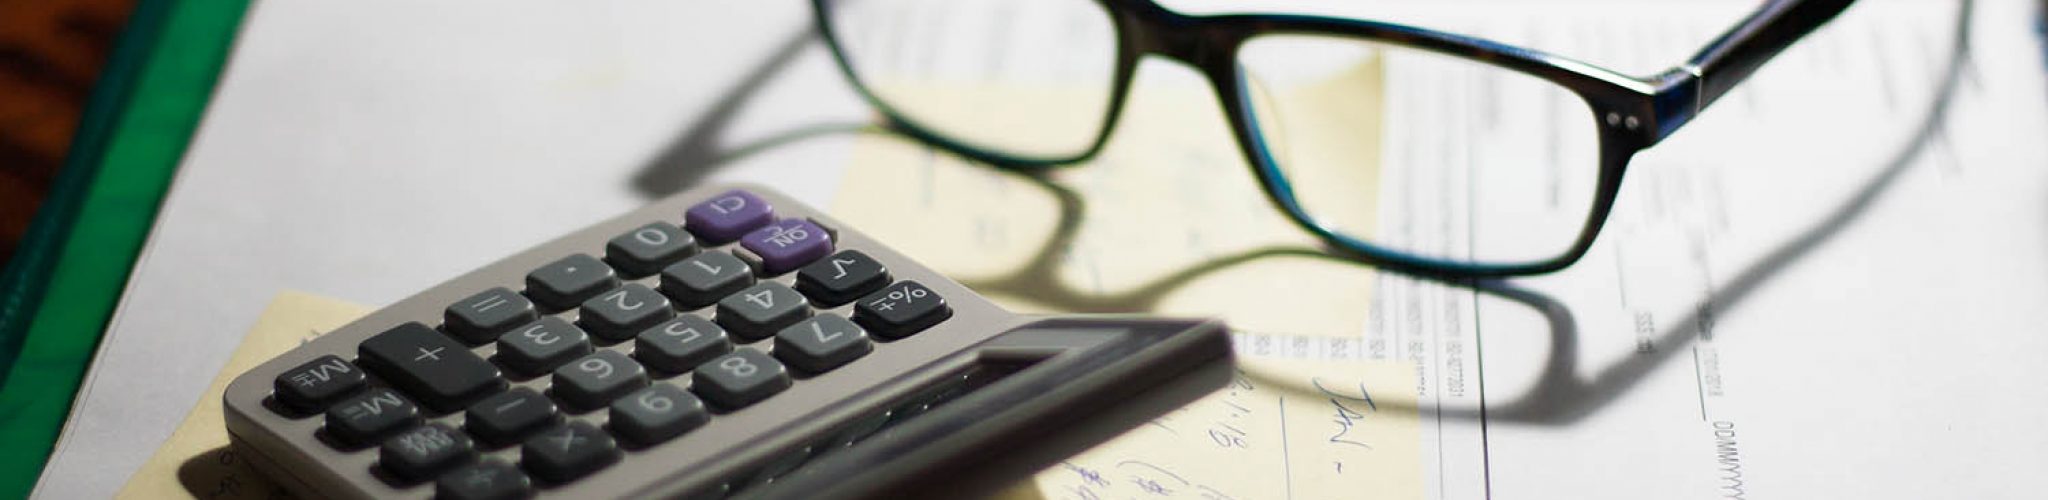 Glasses and calculator on a folder with documents, bills and notes on a desk